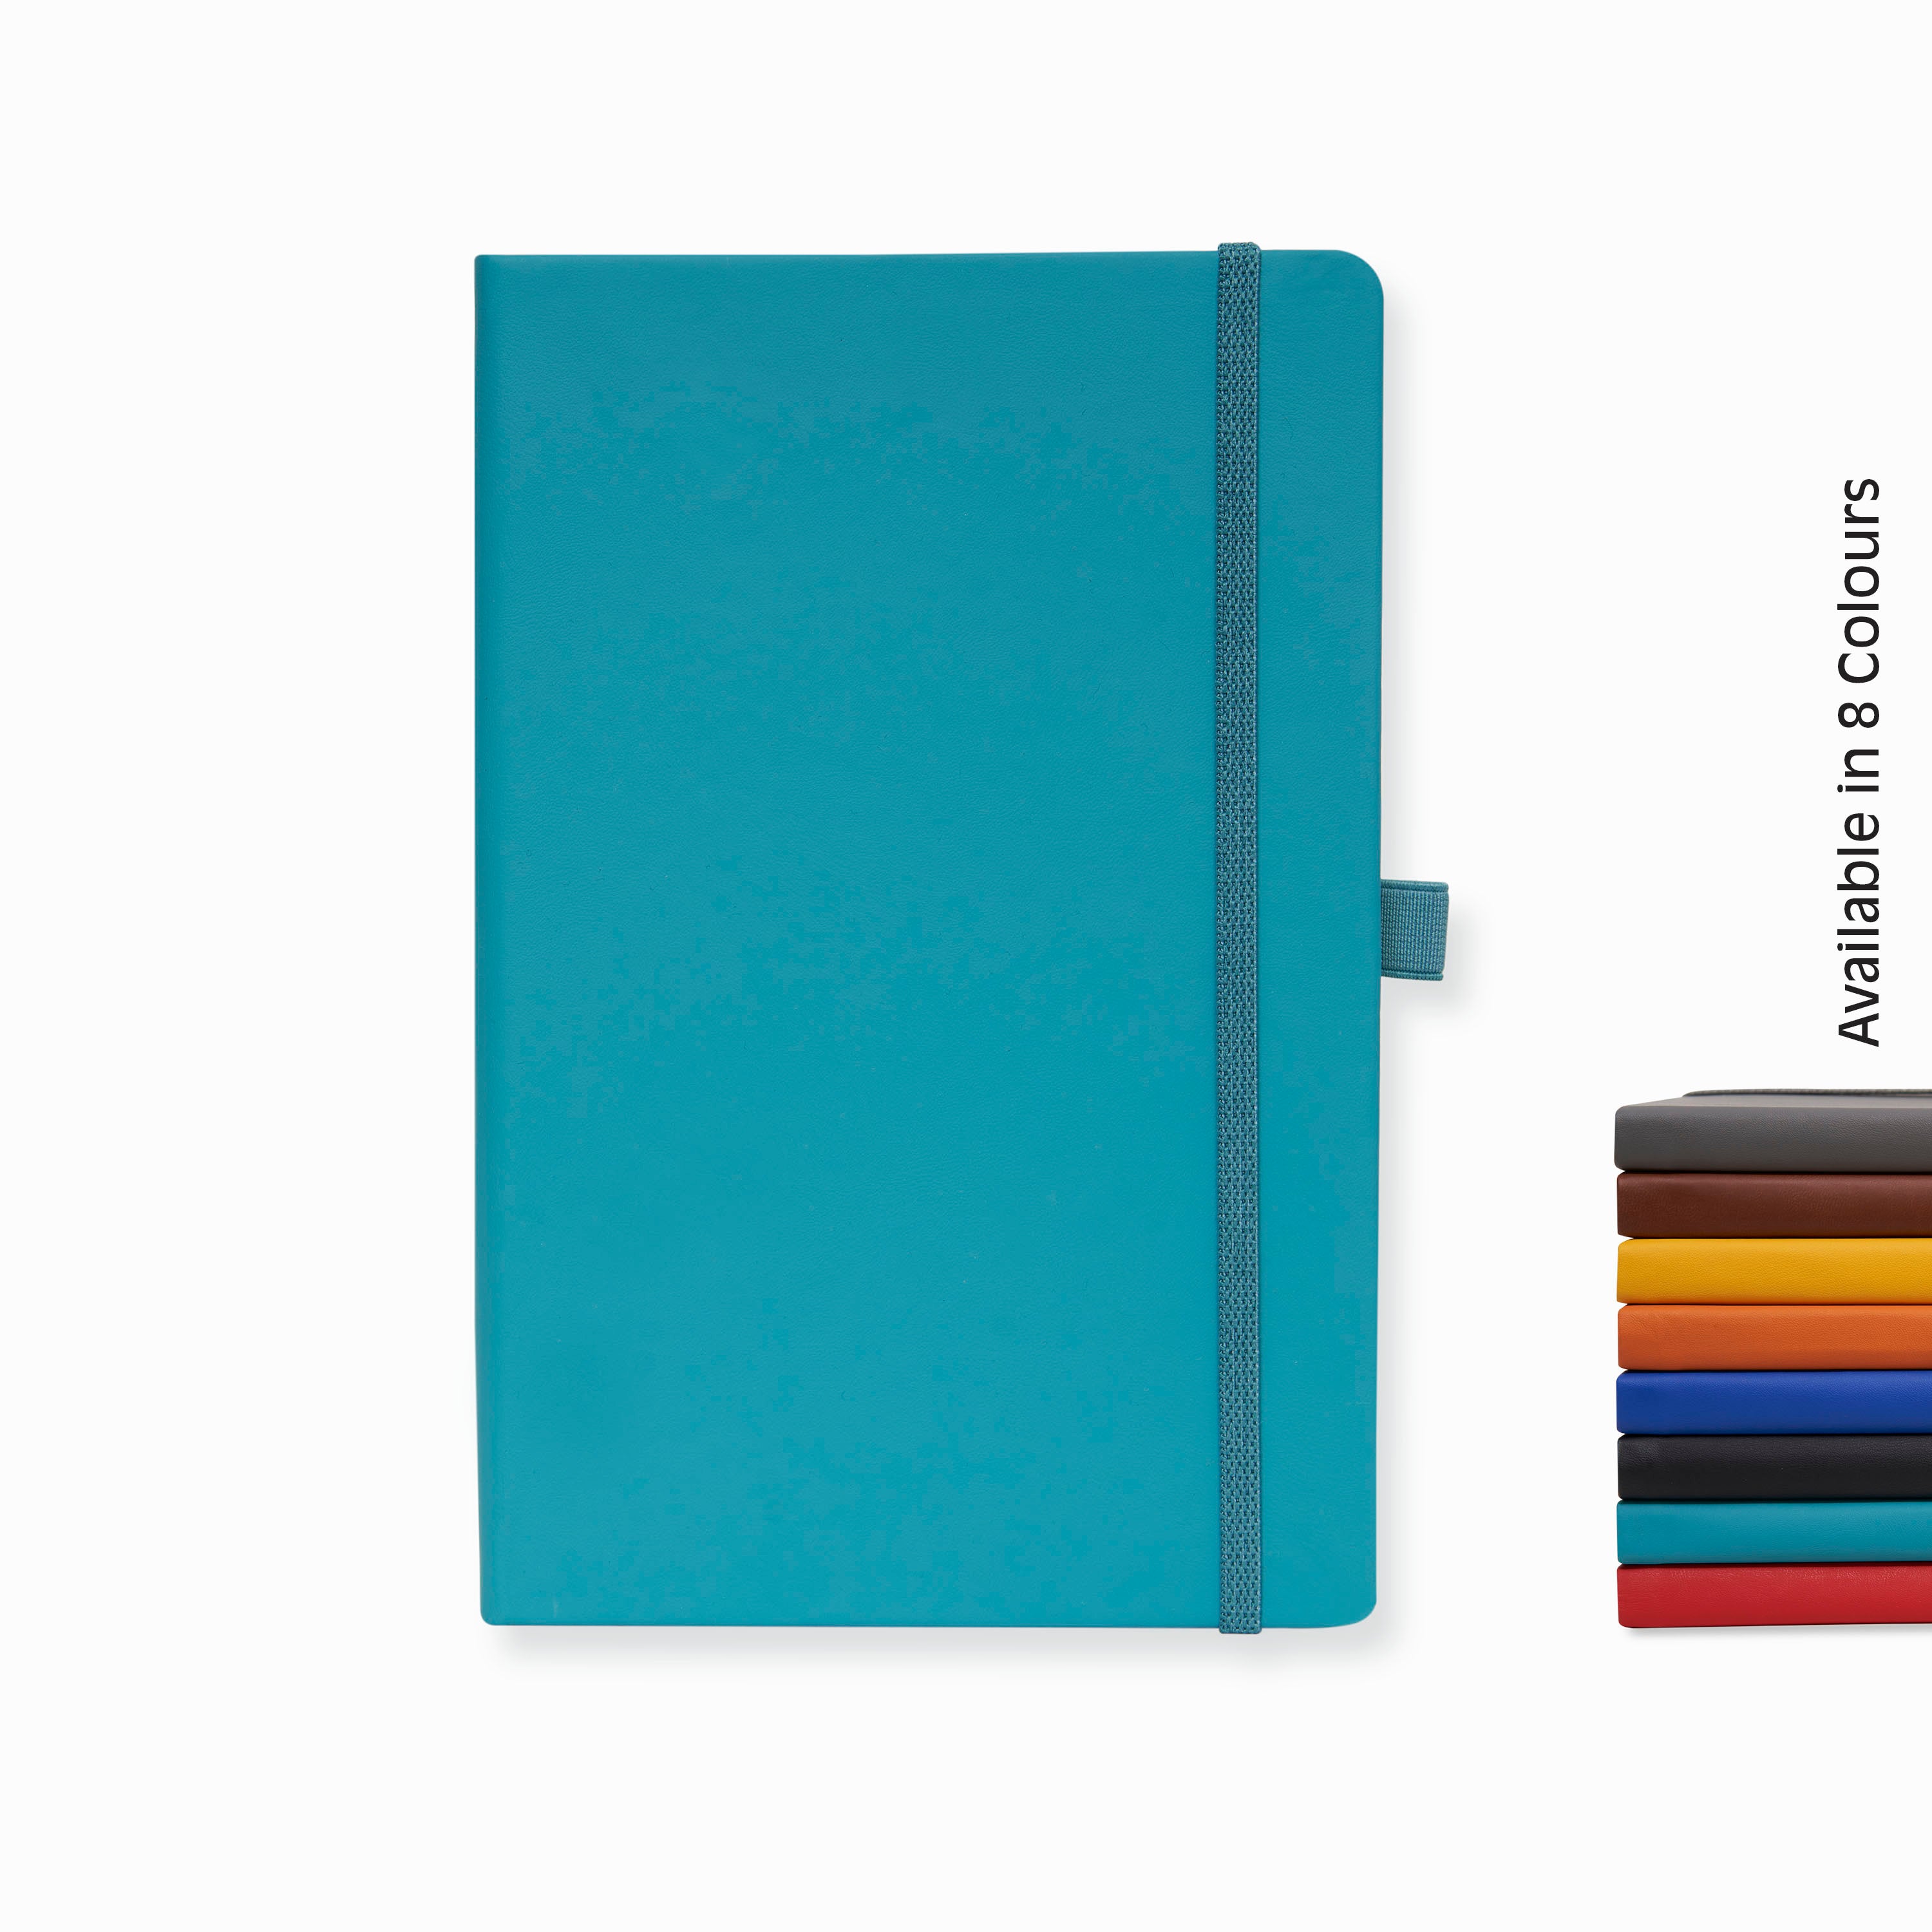 Pro Series Executive A5 PU Leather Hardbound Ruled Diary with Pen Loop - TURKISH BLUE